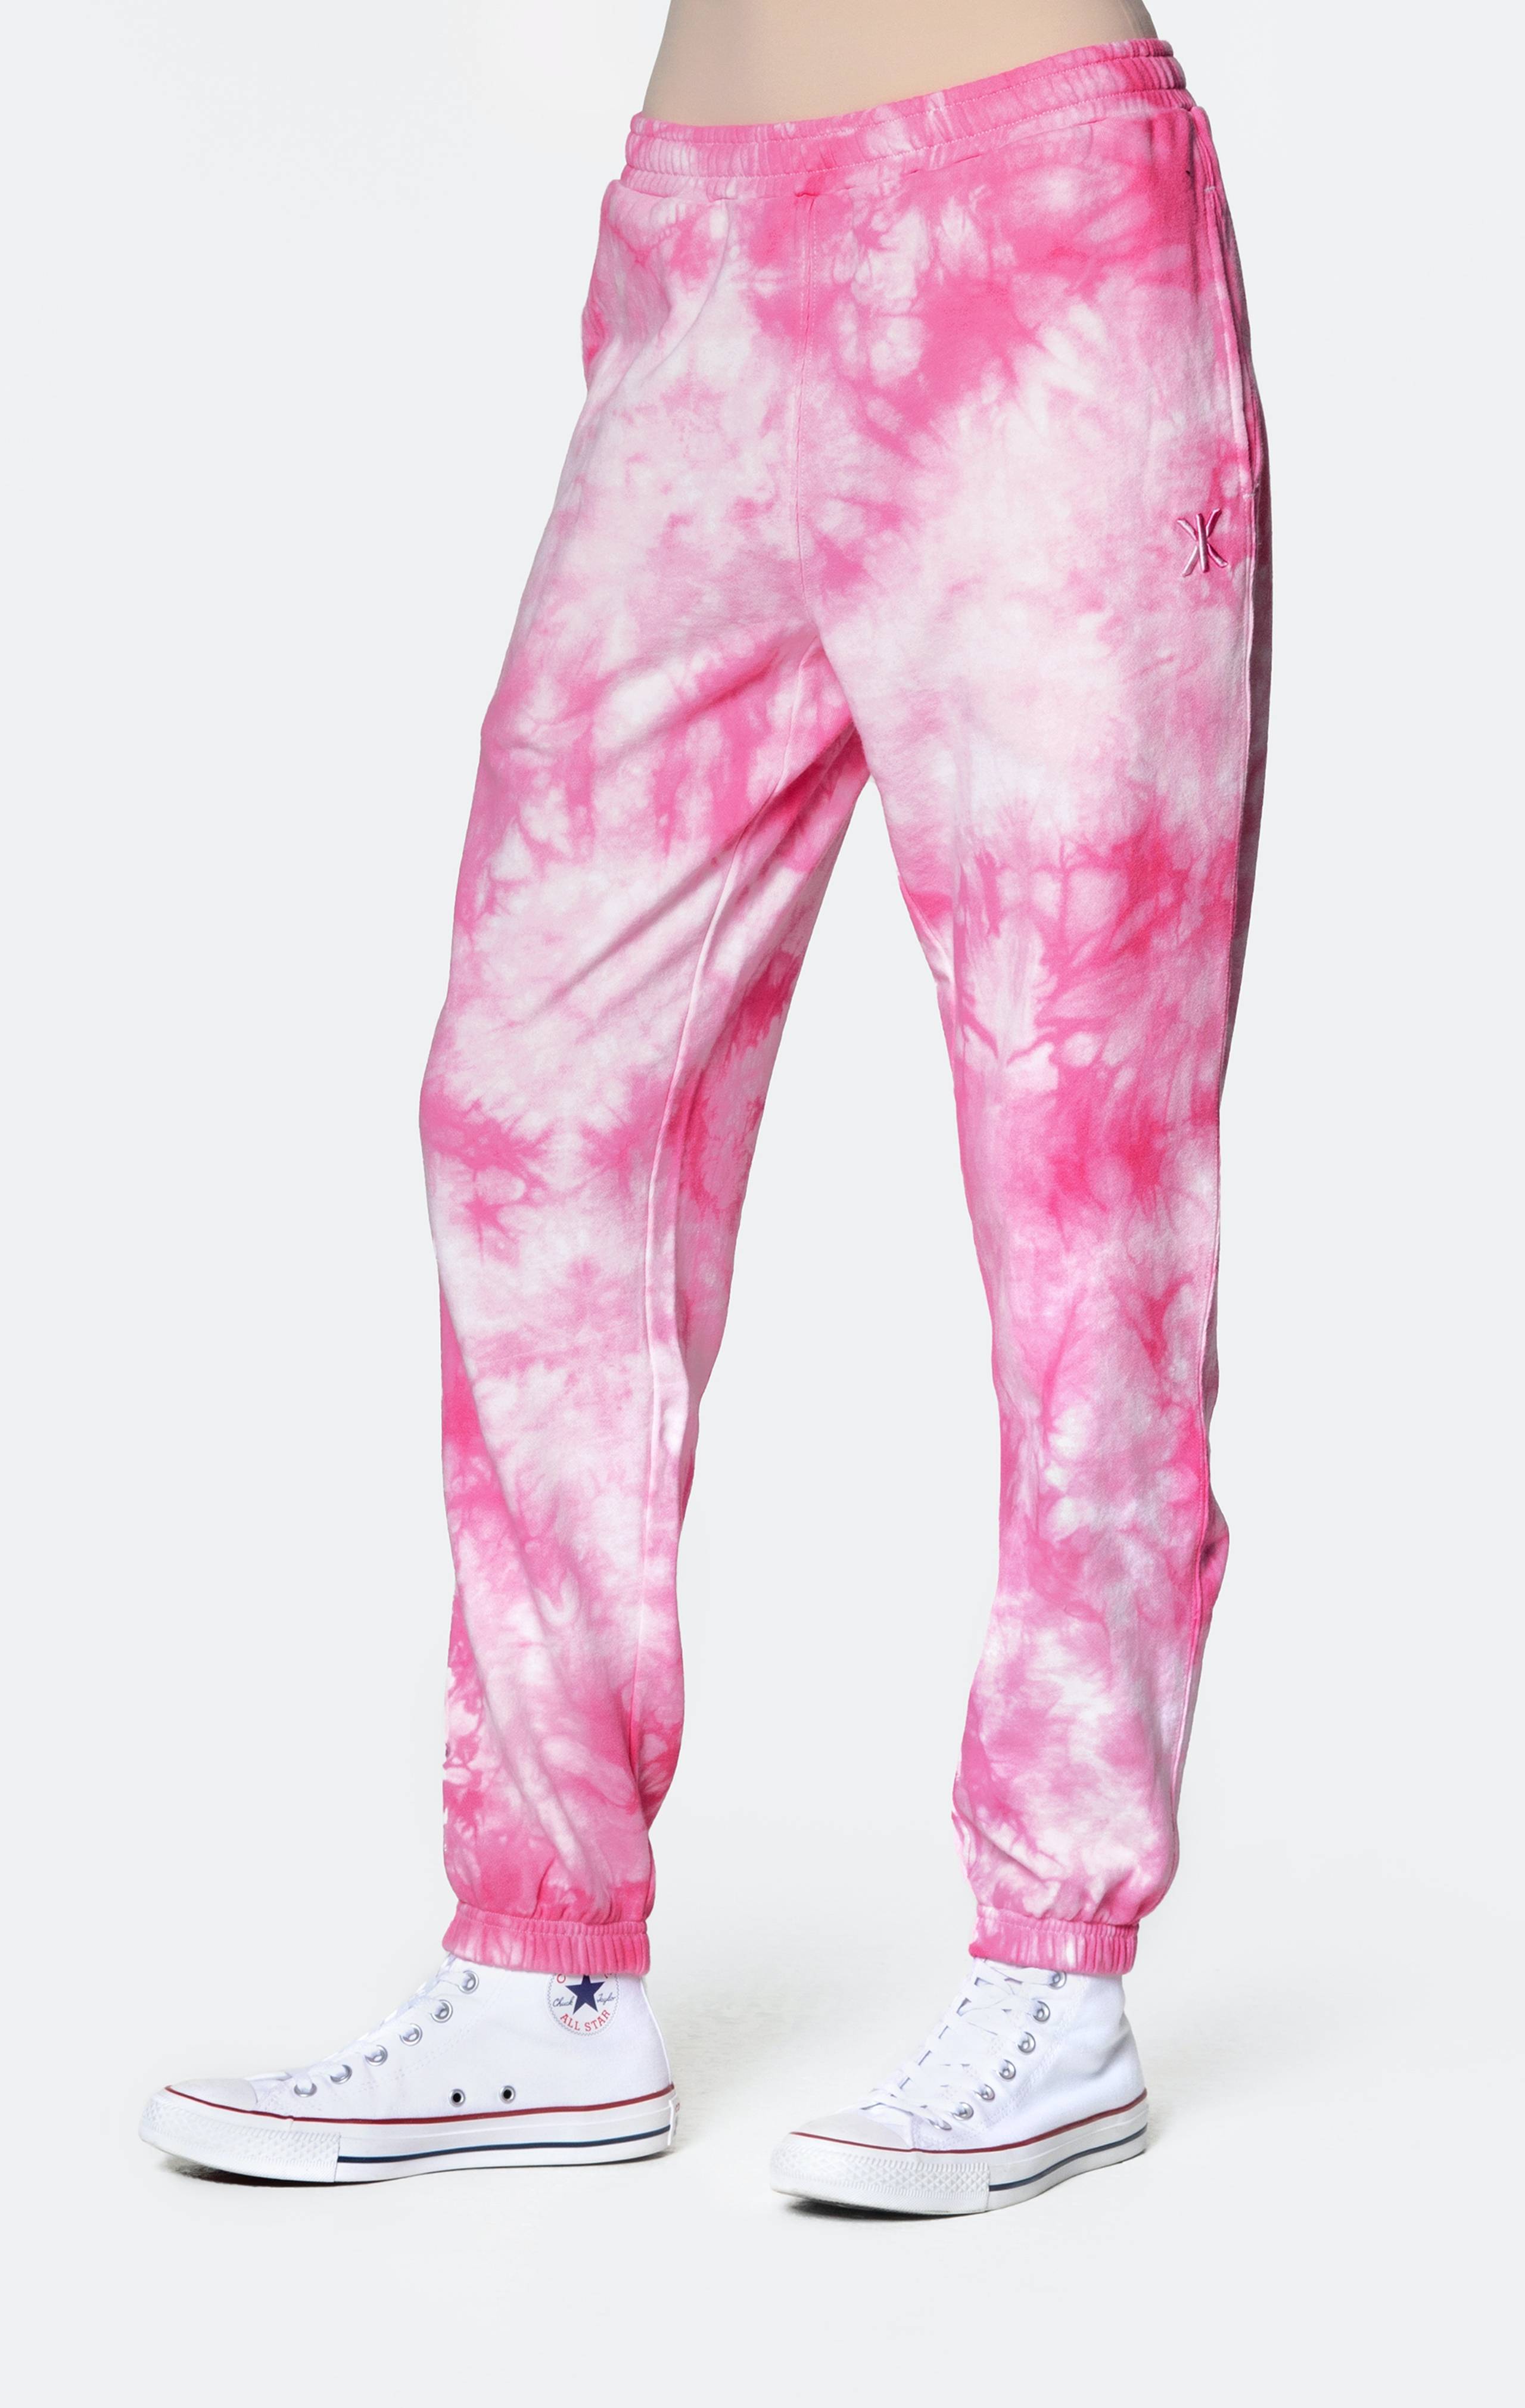 Onepiece Tie Dye Pant Pink - 7